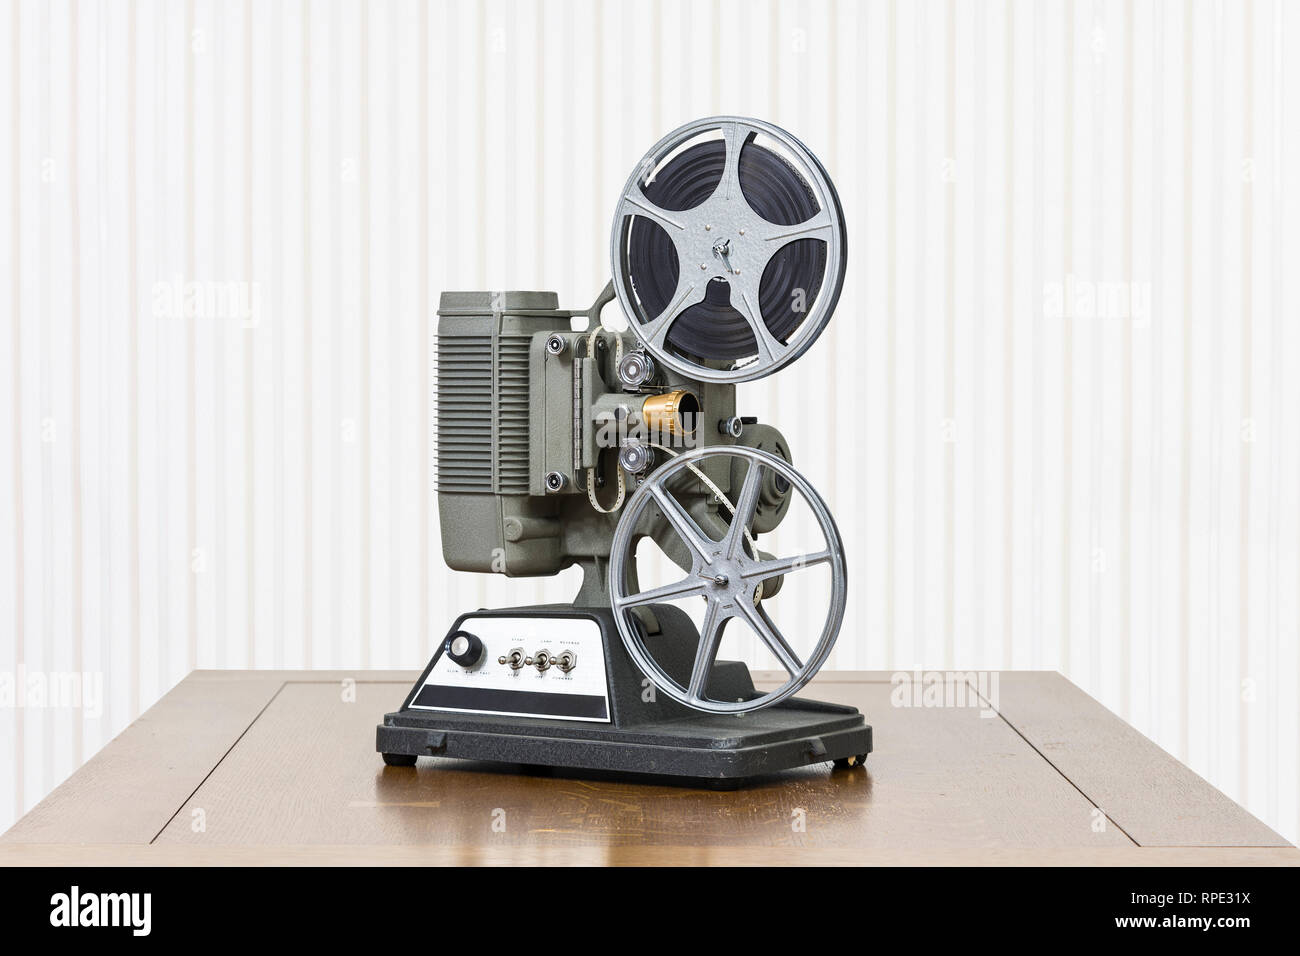 Antique 8mm home movie projector on wood table Stock Photo - Alamy